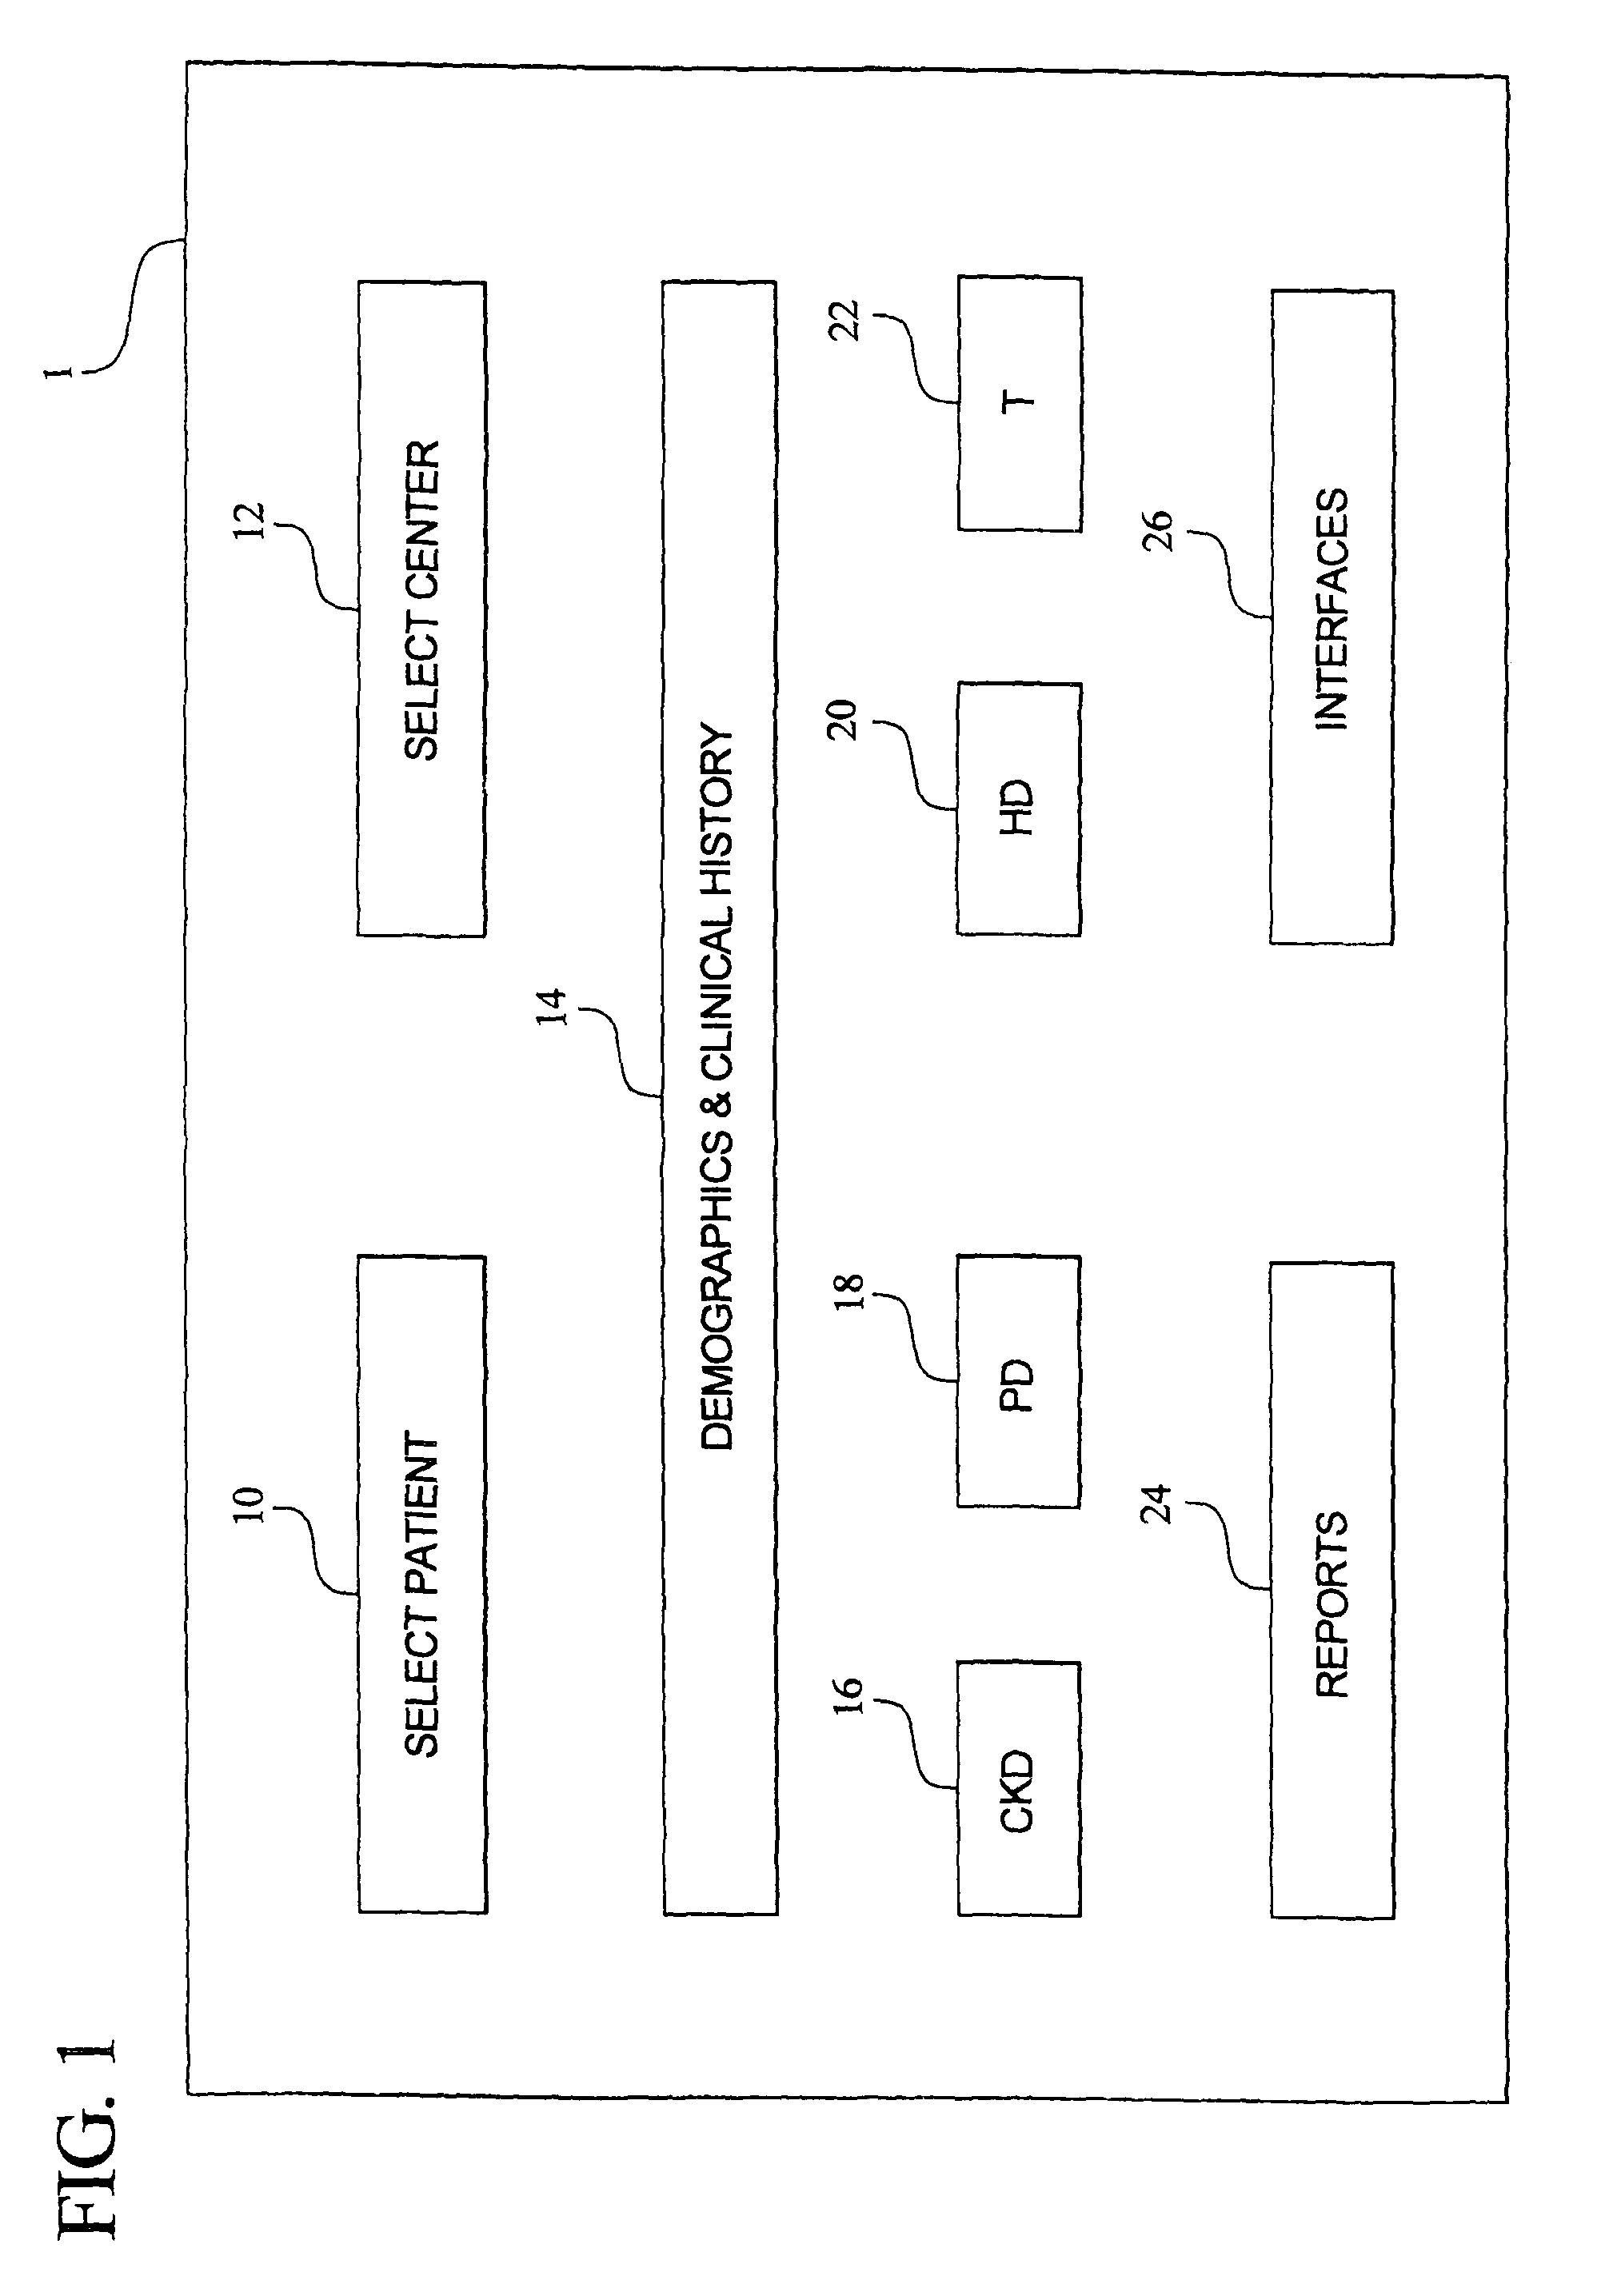 System and a method for providing integrated access management for peritoneal dialysis and hemodialysis